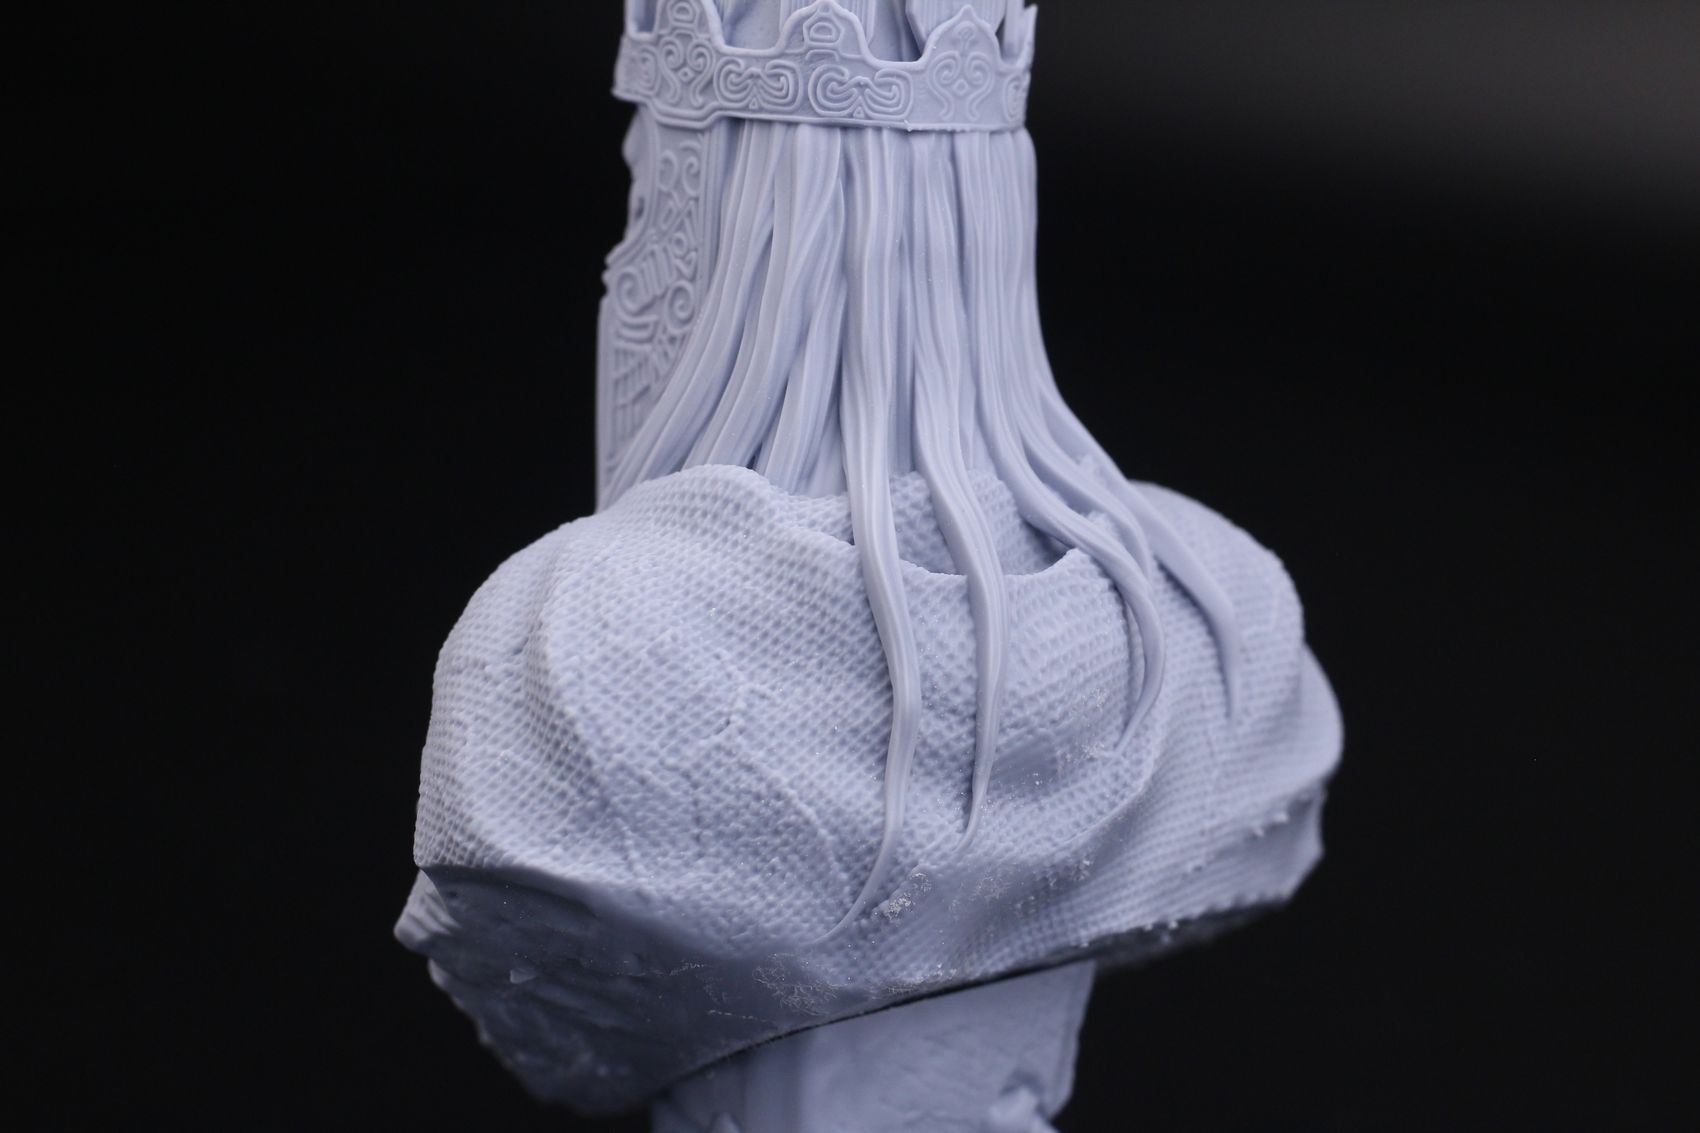 King of the Dead by Fotis Mint Anycubic Photon D2 Review7 | Anycubic Photon D2 Review: DLP Resin 3D Printer